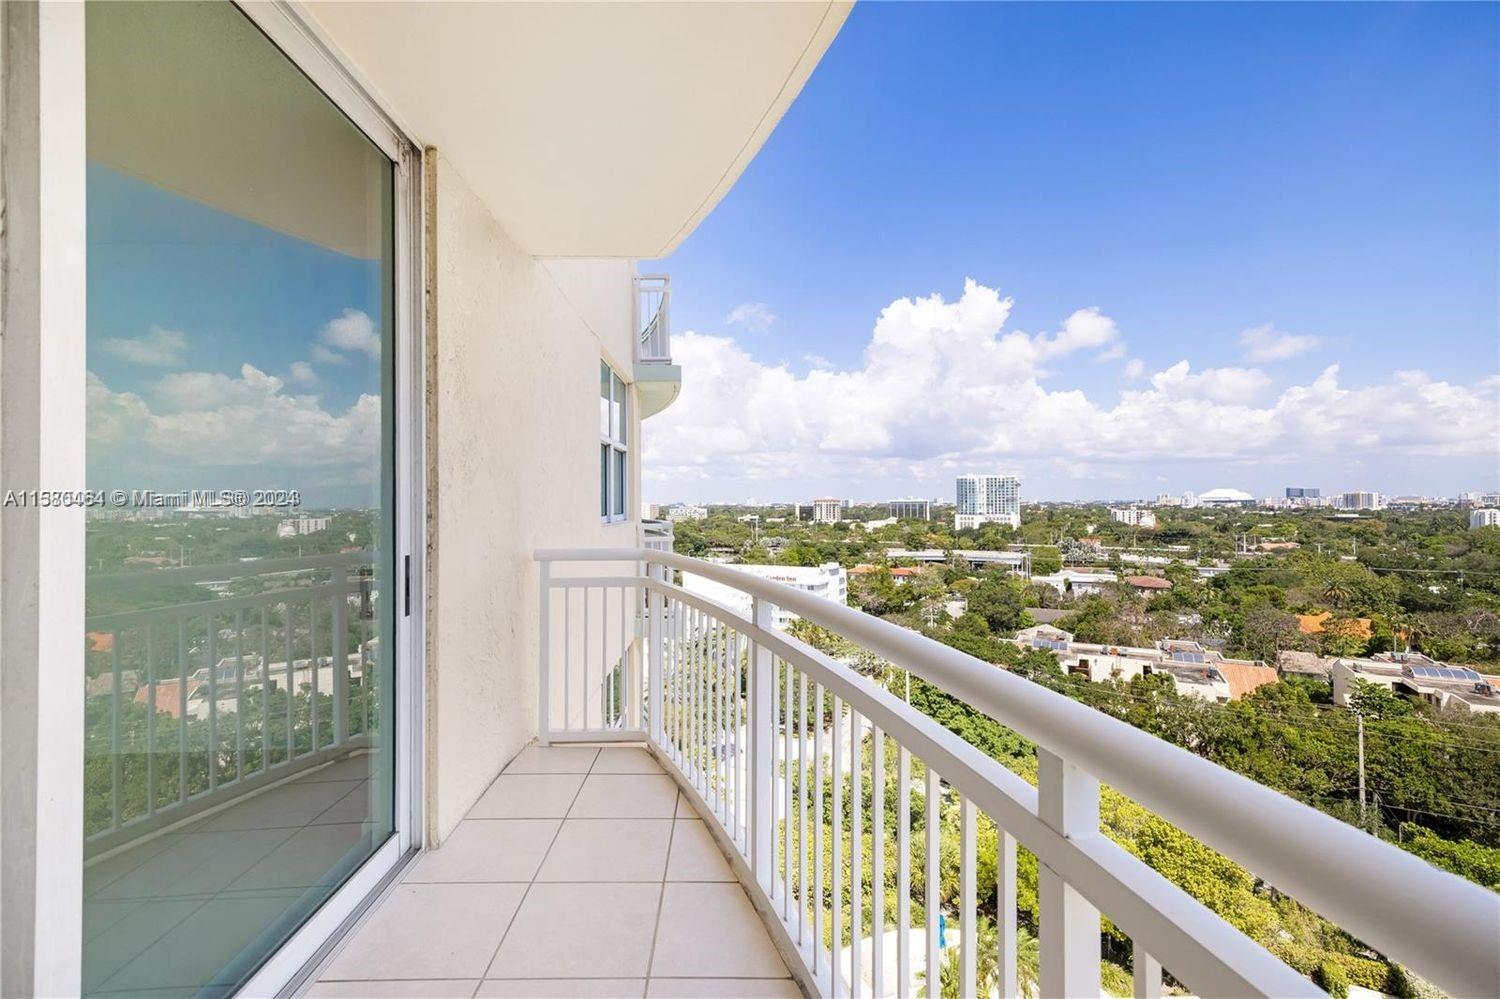 Located in the most quiet area of Brickell Avenue, this 1 bedroom 1 bathroom unit at the Metropolitan features unblocked views of the Miami skyline. The unit also features a washer & dryer inside 2 walk-in closets, 1 covered/assigned parking space, and 1 storage space under AC. The building has Pool, Hot tub, Jacuzzi, Sauna, bbq, Tennis court, Sundry shop w/seating area, Media room, Meeting room, Business center, Lobby w/Concierge service, bicycle room & complimentary Valet parking. 50" Smart TV in the living room is staying if the tenant desires. Cable and water are included. Available July 26, 2024 - Yearly rentals only